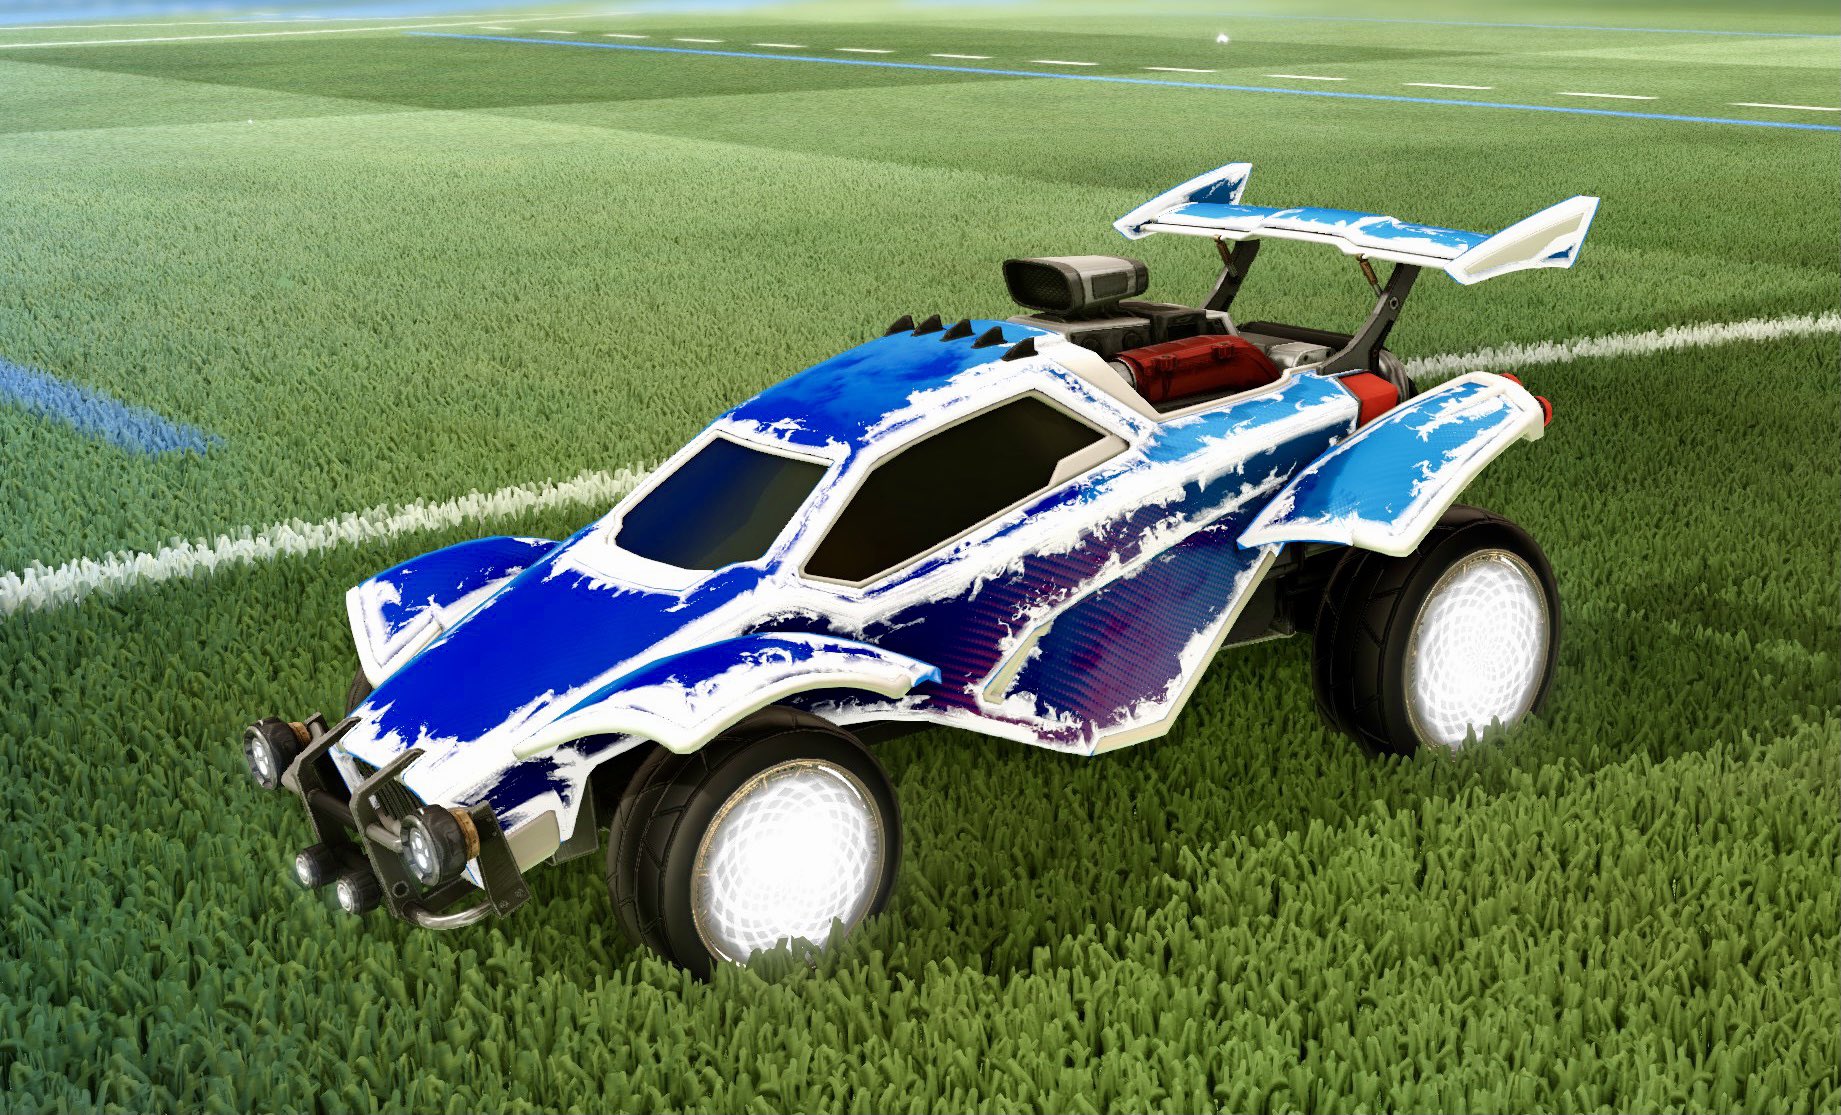 ncj on Twitter: "𝐇𝐞𝐚𝐭𝐰𝐚𝐯𝐞 𝐆𝐢𝐯𝐞𝐚𝐰𝐚𝐲! Giving away a #RocketLeague  heatwave decal (PC ONLY) All you need to do to win is: - Retweet this tweet  - Follow @ncjrl - Mention 2 friends